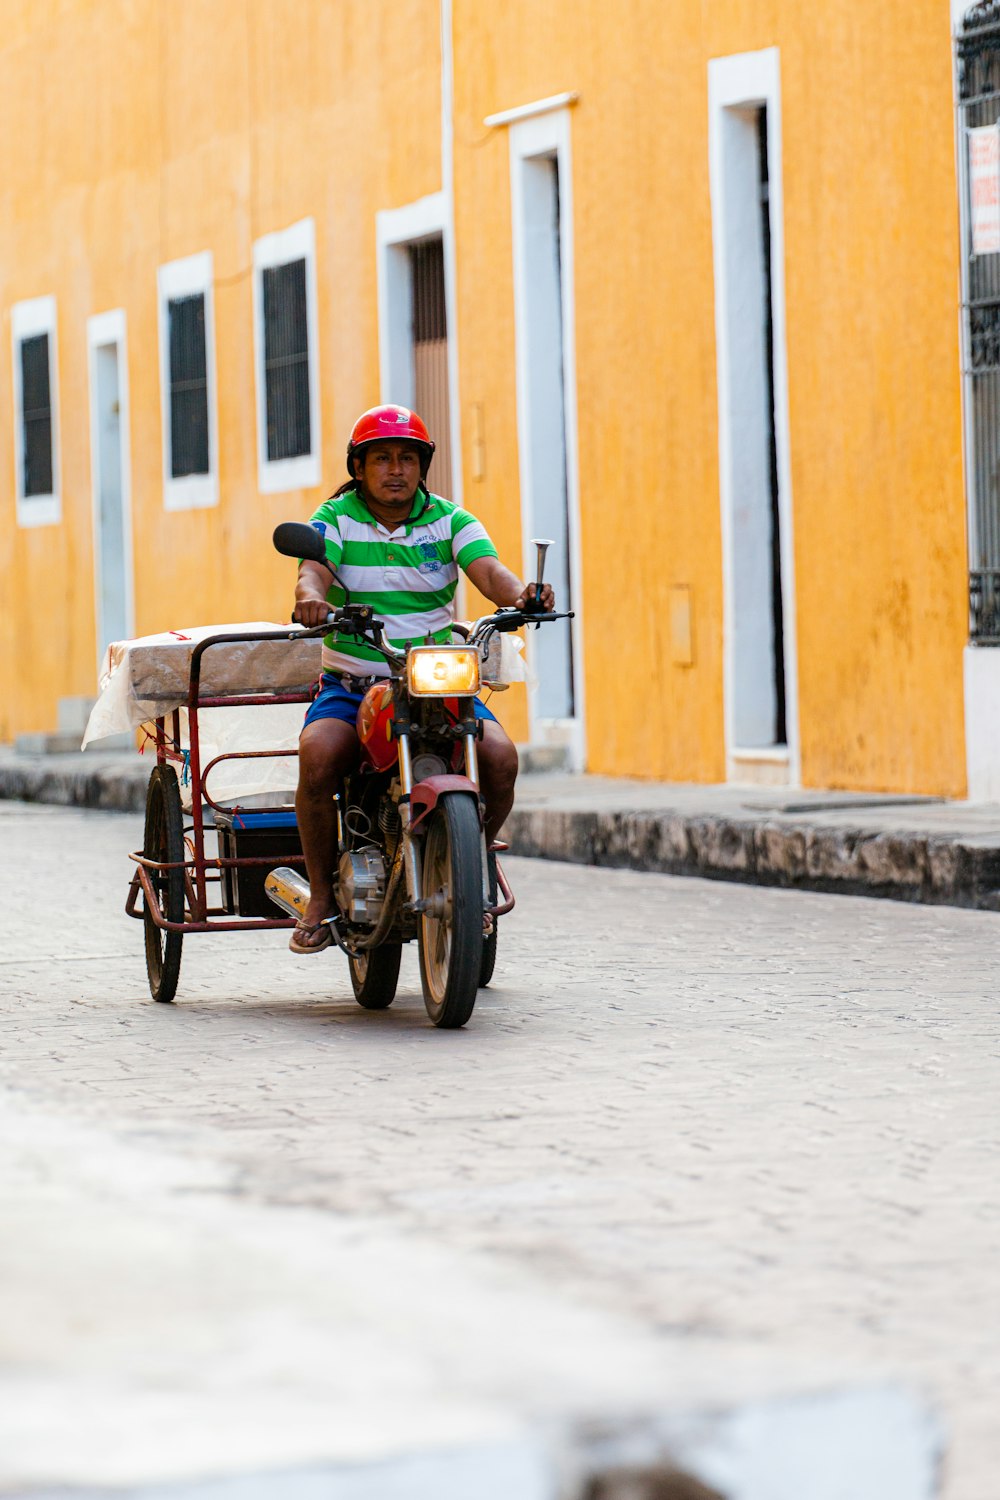 boy in green jacket riding on brown and black trike during daytime